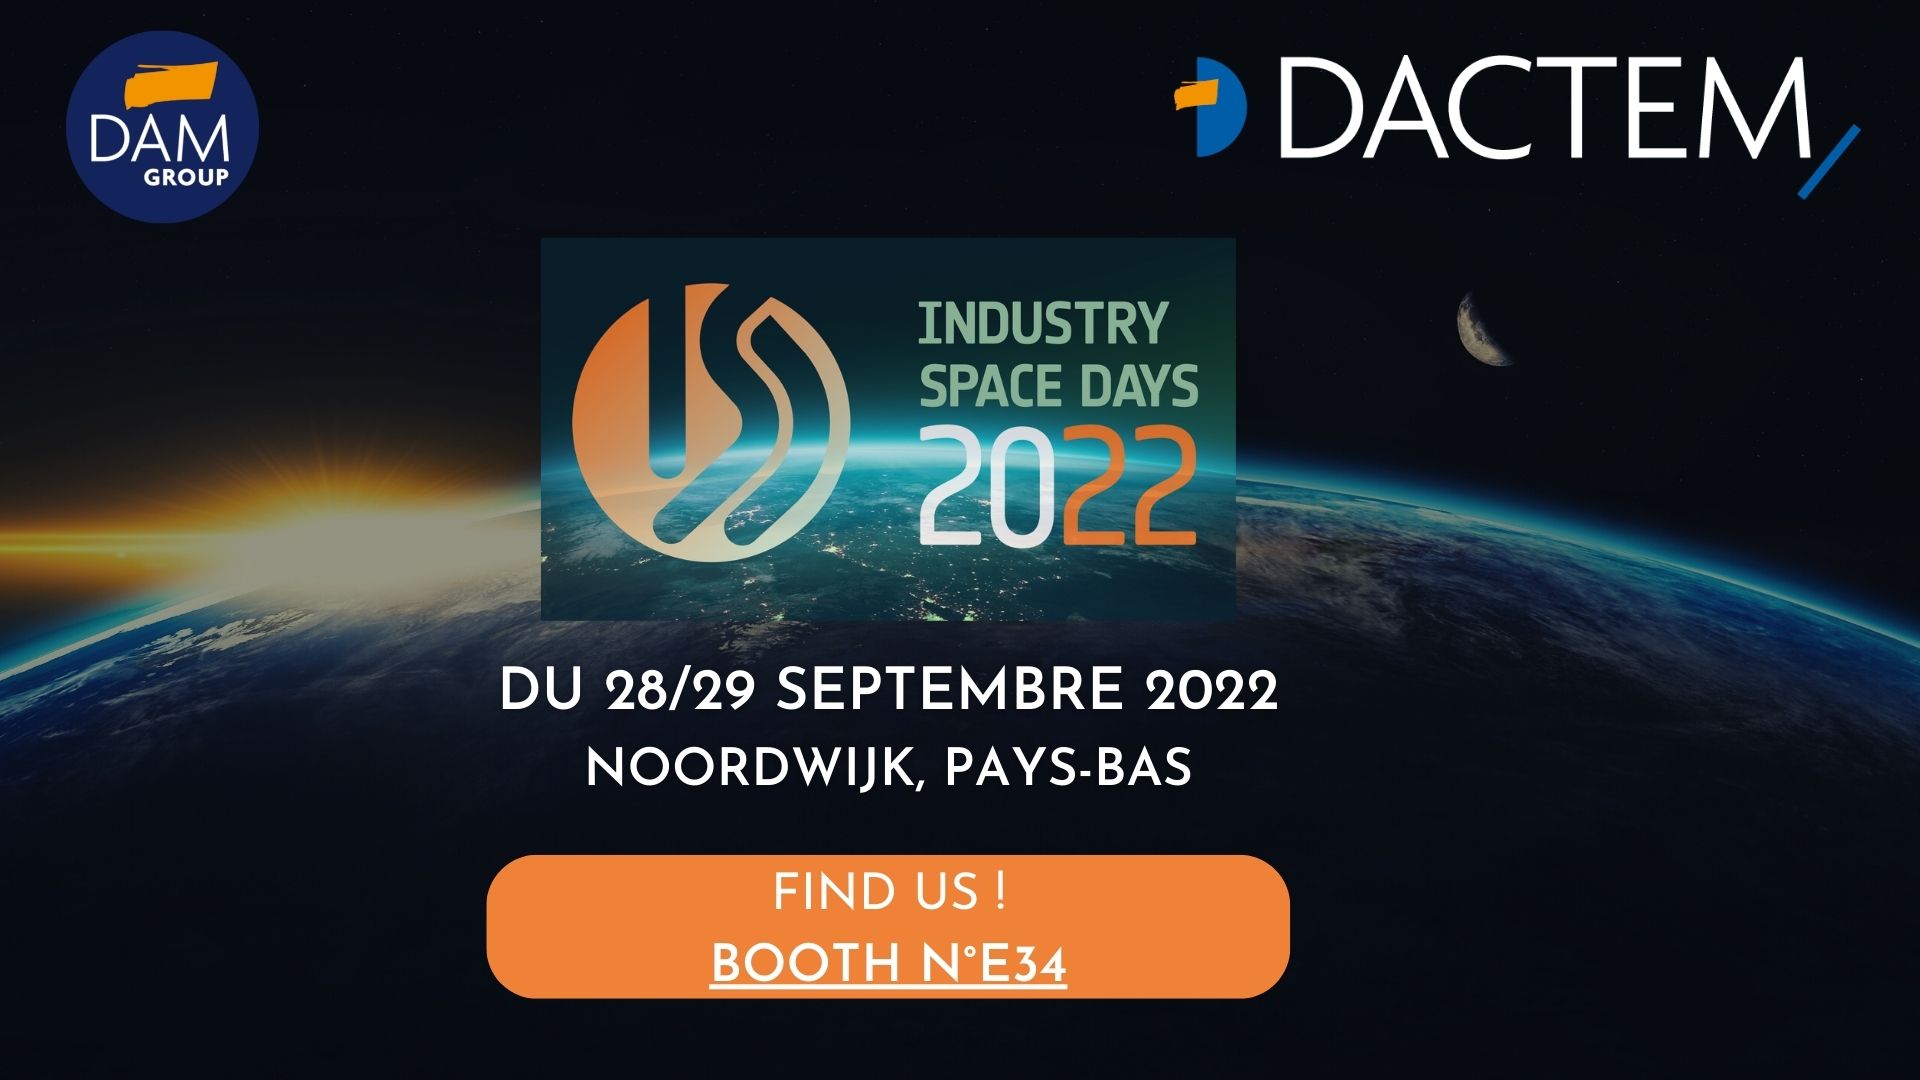 DACTEM: Industry space days 2022